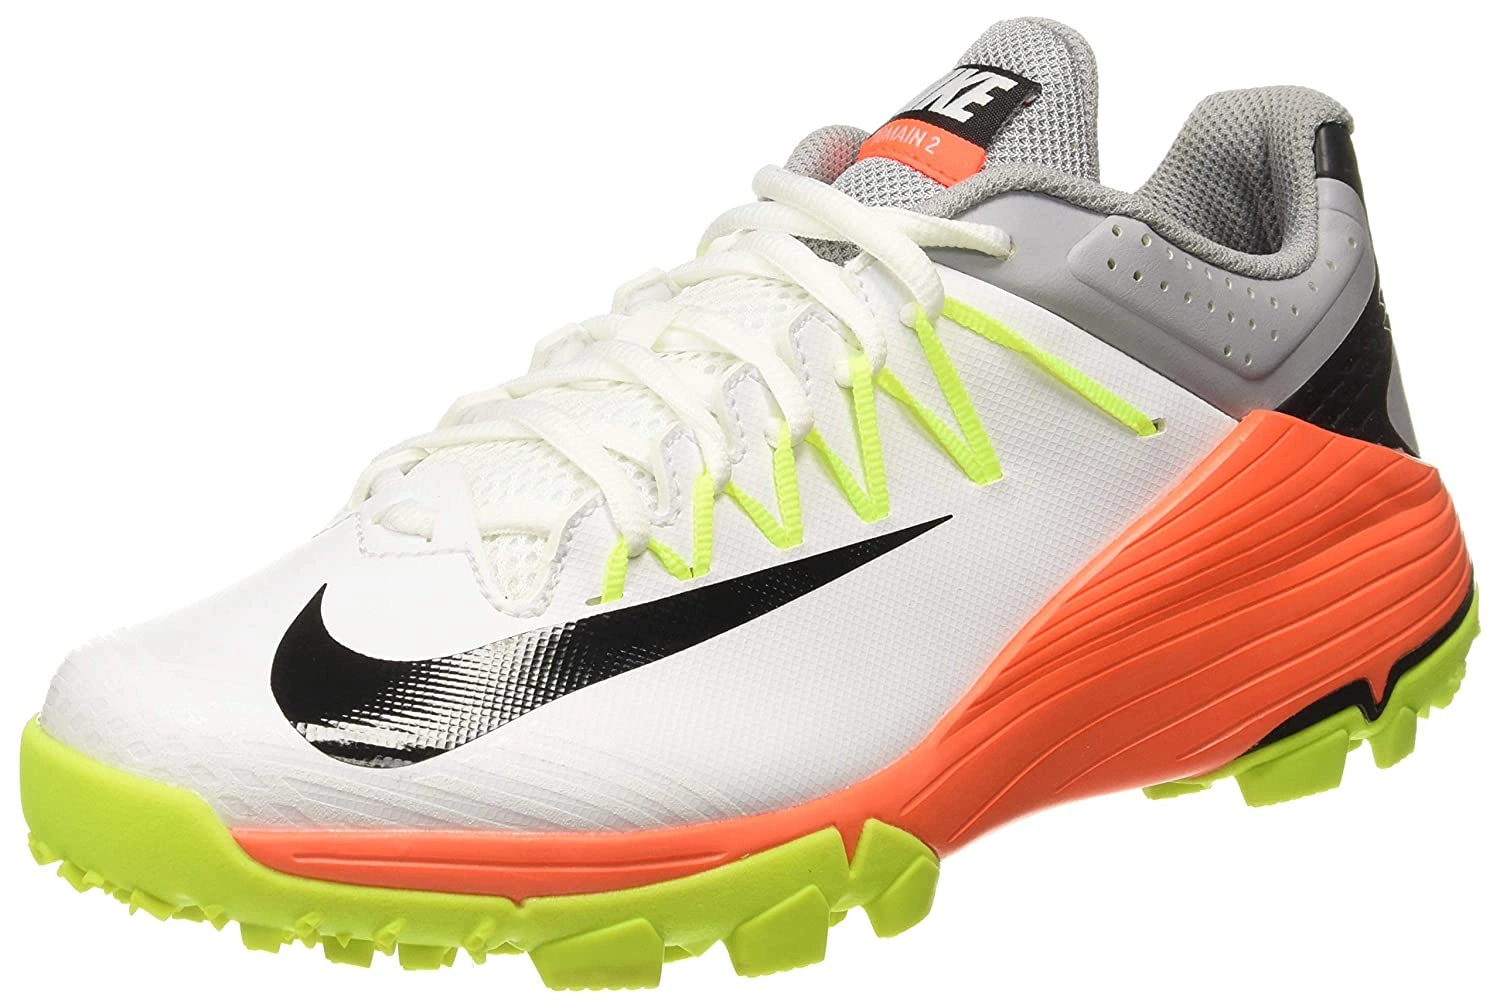 nike cricket rubber spikes shoes